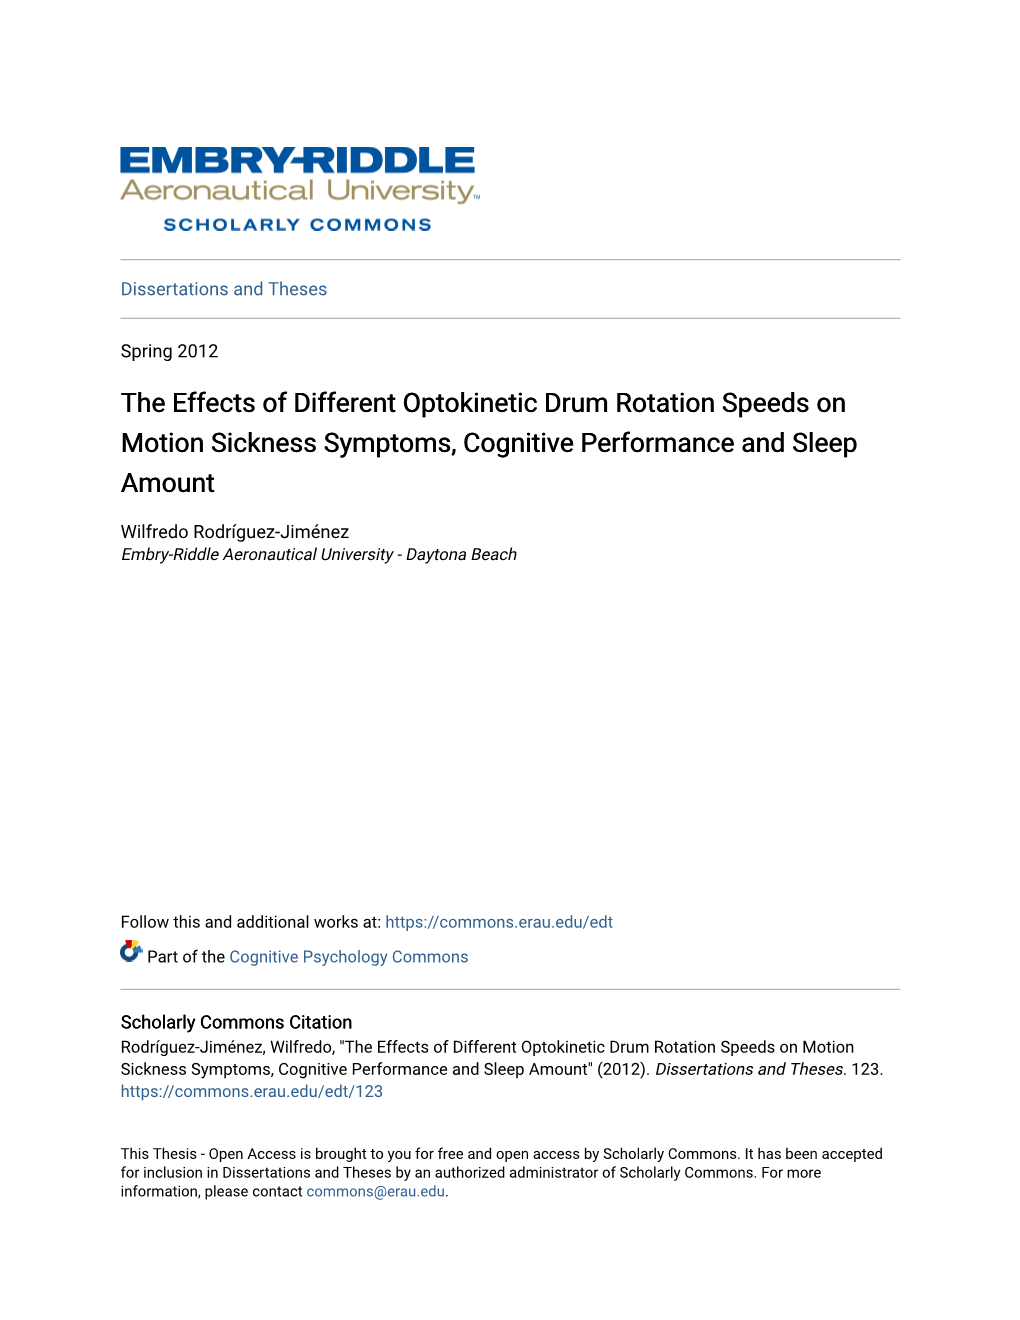 The Effects of Different Optokinetic Drum Rotation Speeds on Motion Sickness Symptoms, Cognitive Performance and Sleep Amount